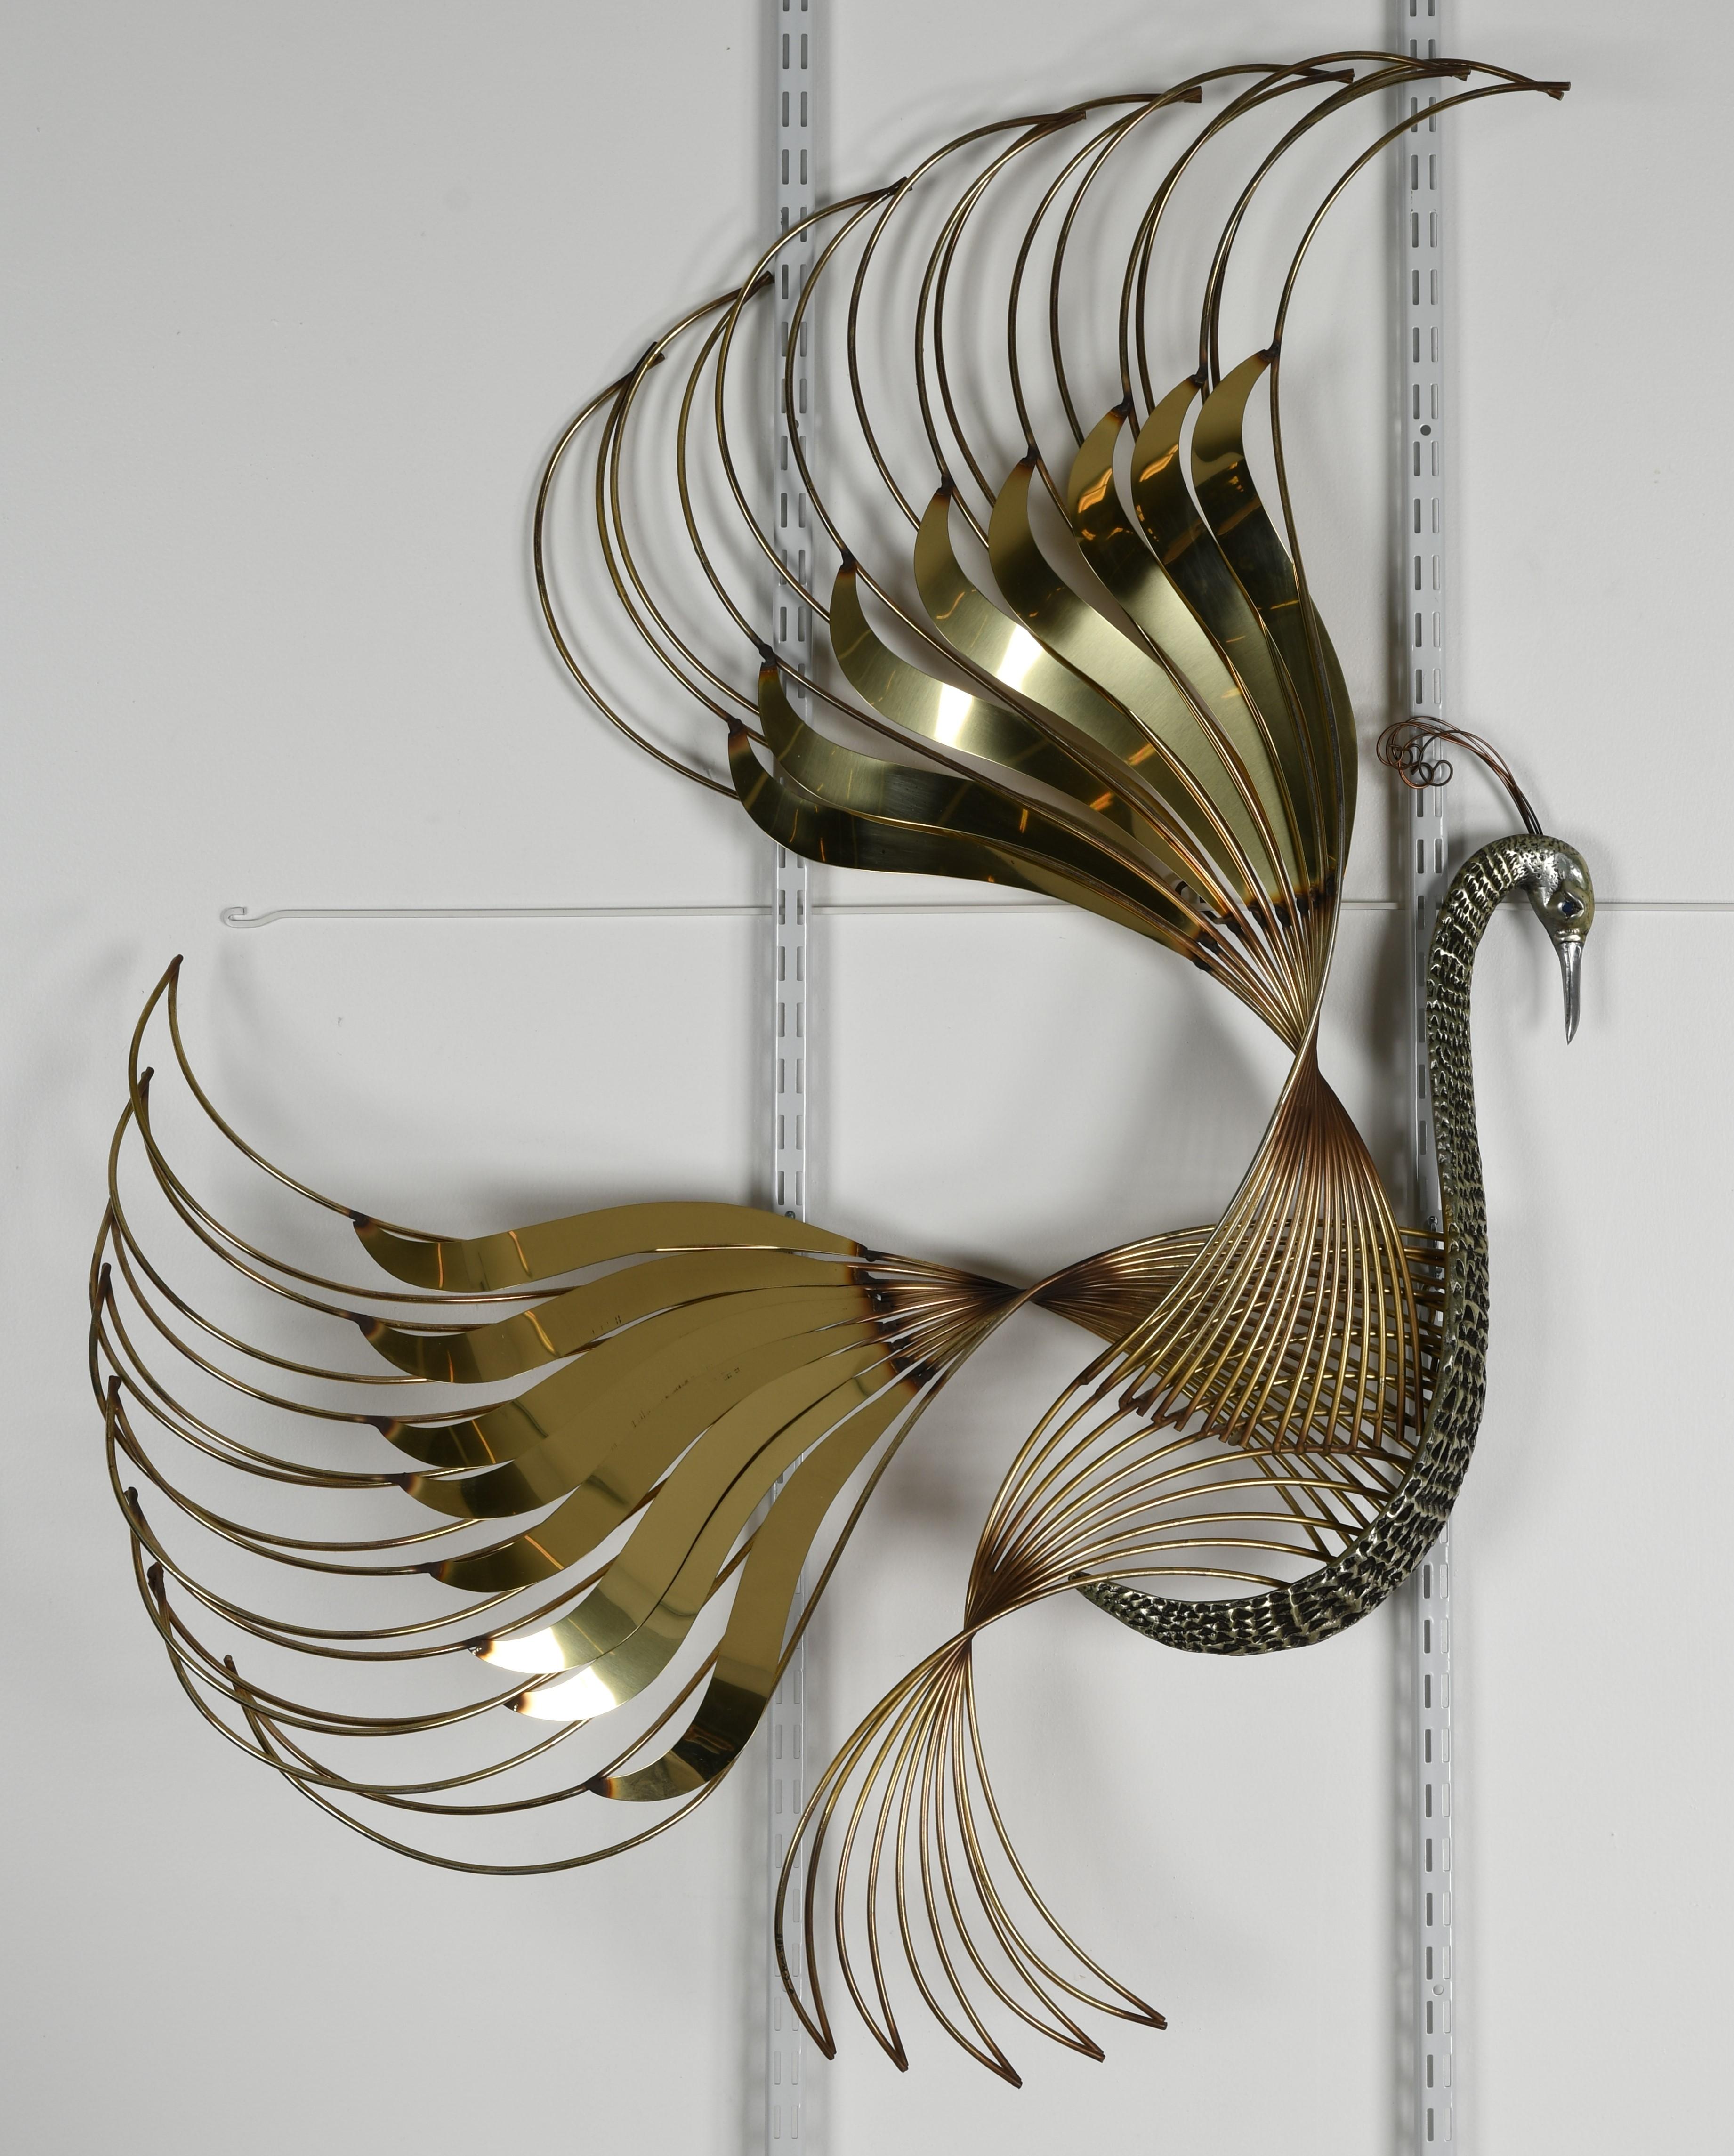 A signed sculptural bird of paradise or peacock wall sculpture by Curtis Jere. This sculpture is signed 